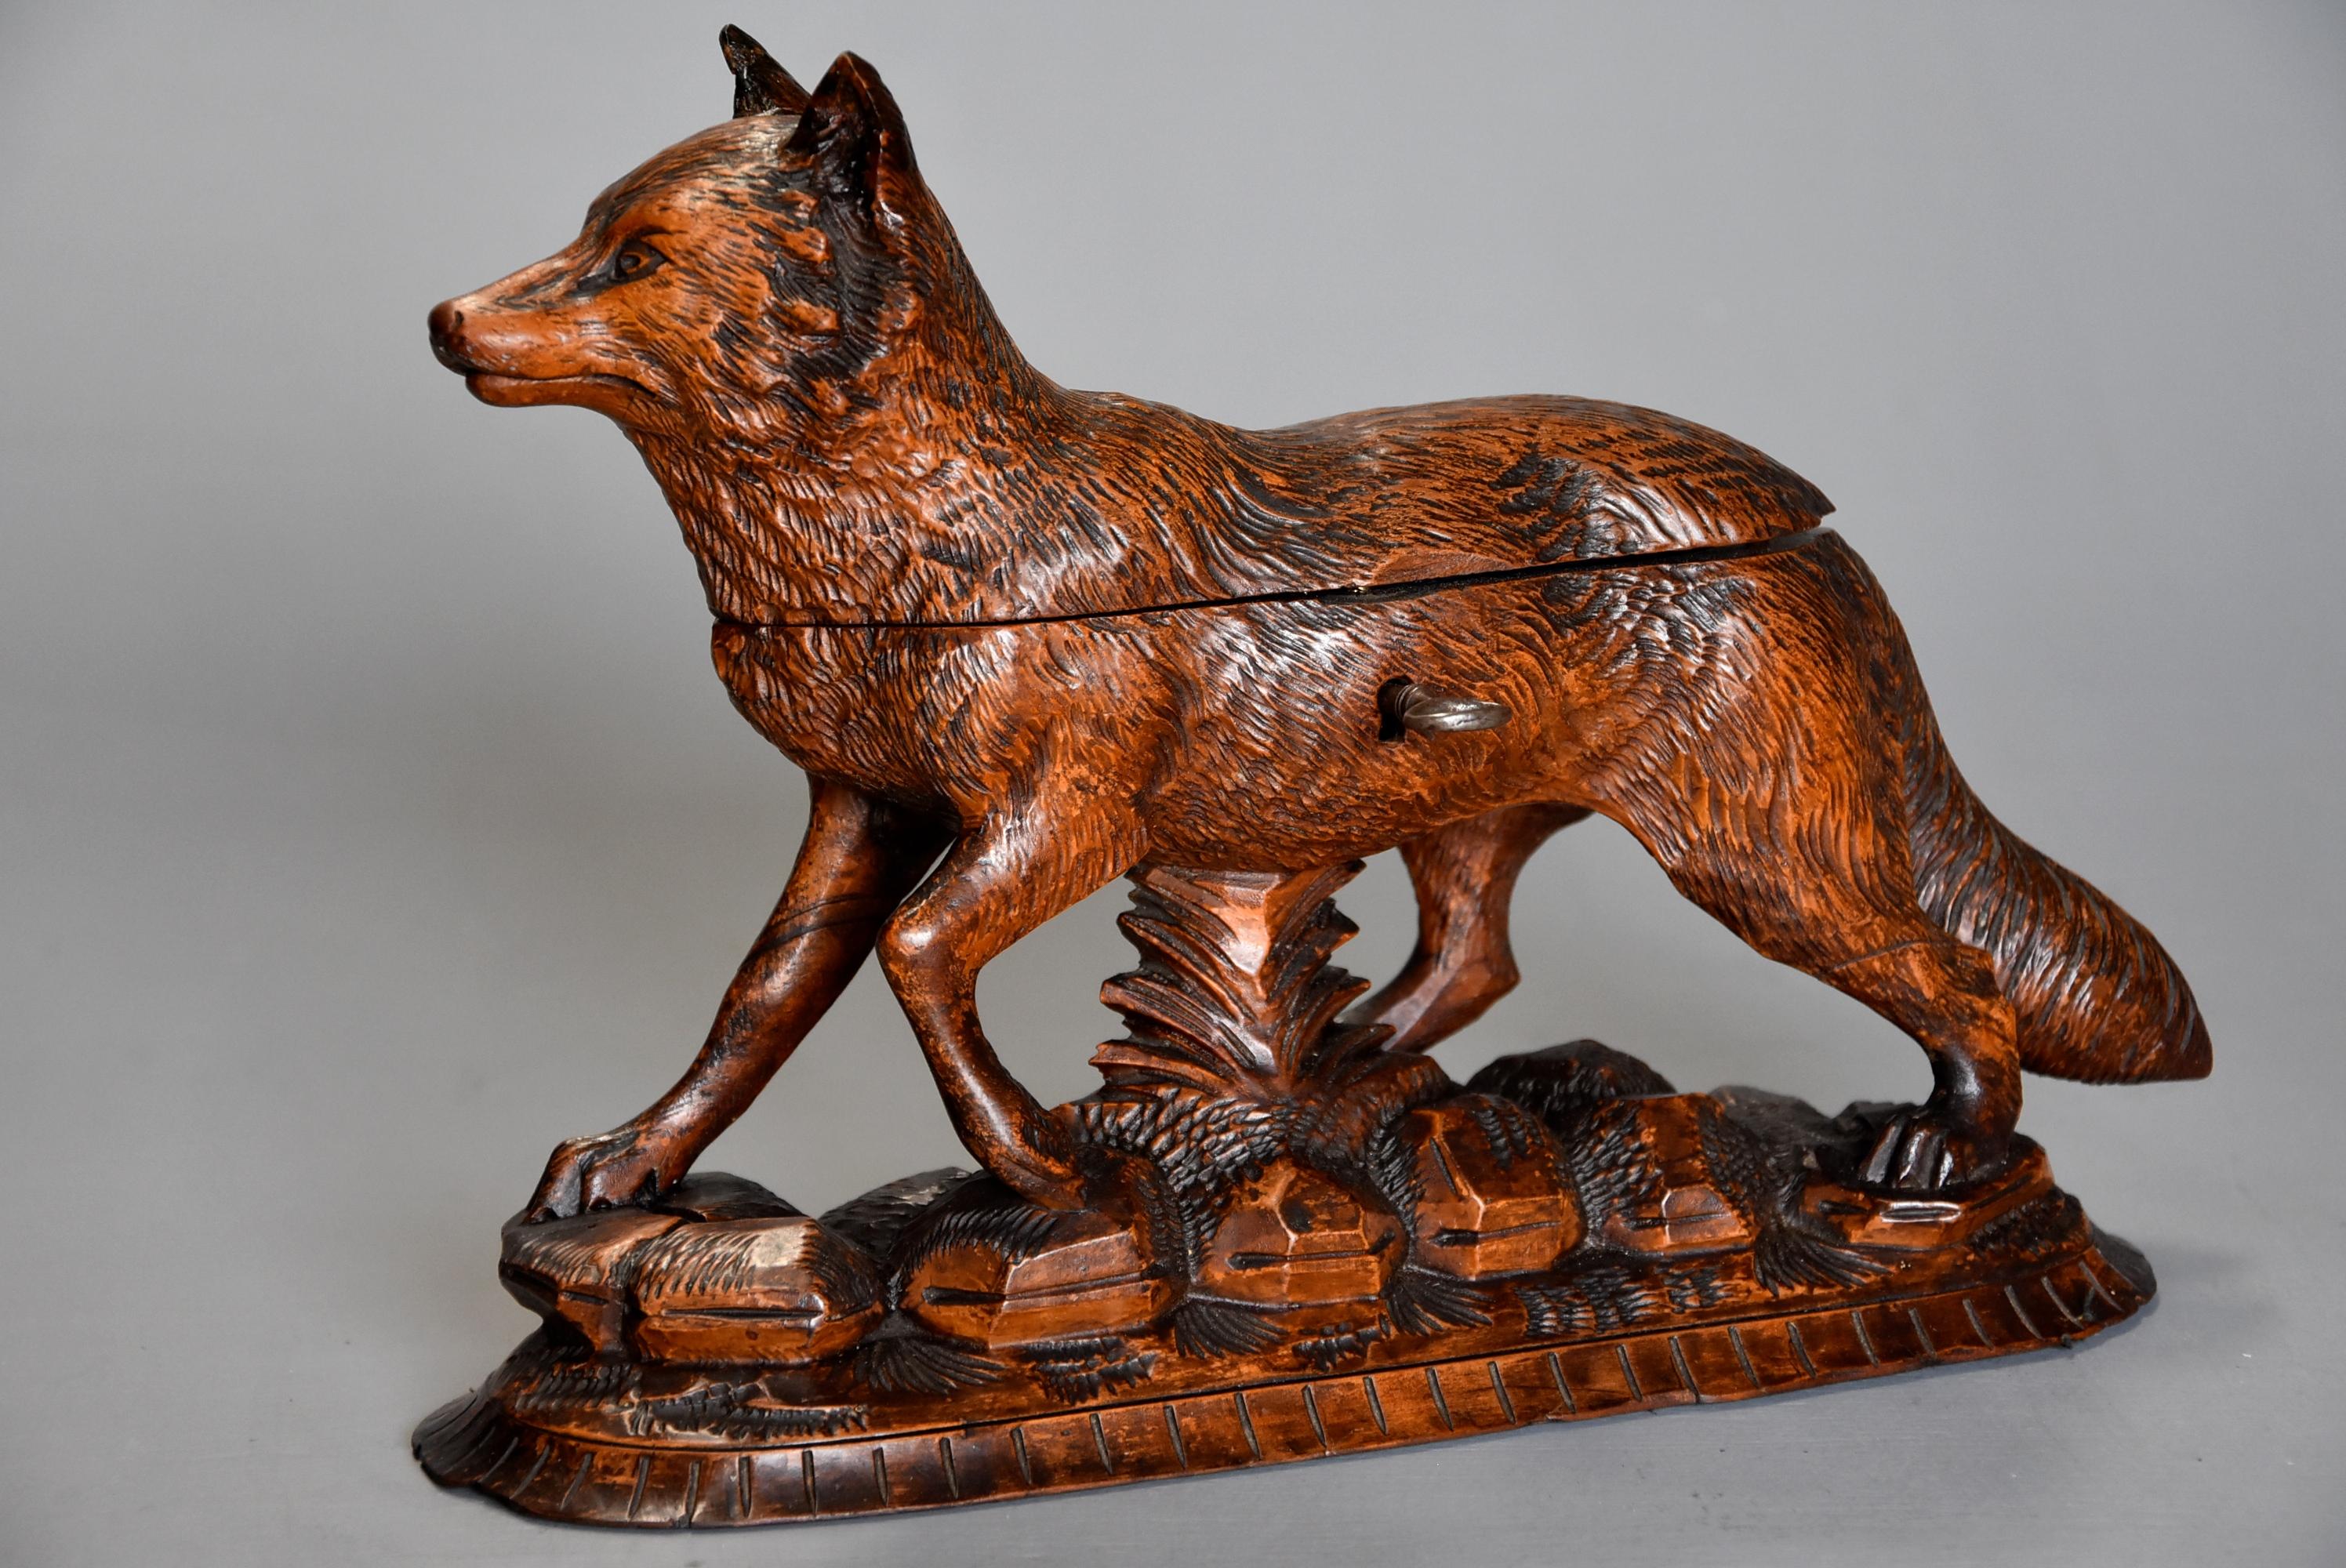 A late 19th century finely carved linden wood Black Forest fox casket, the fine carving typical of the fine work the Brienz area of Switzerland produced.

This superbly carved figure is depicted standing on a naturalistic carved base, the top